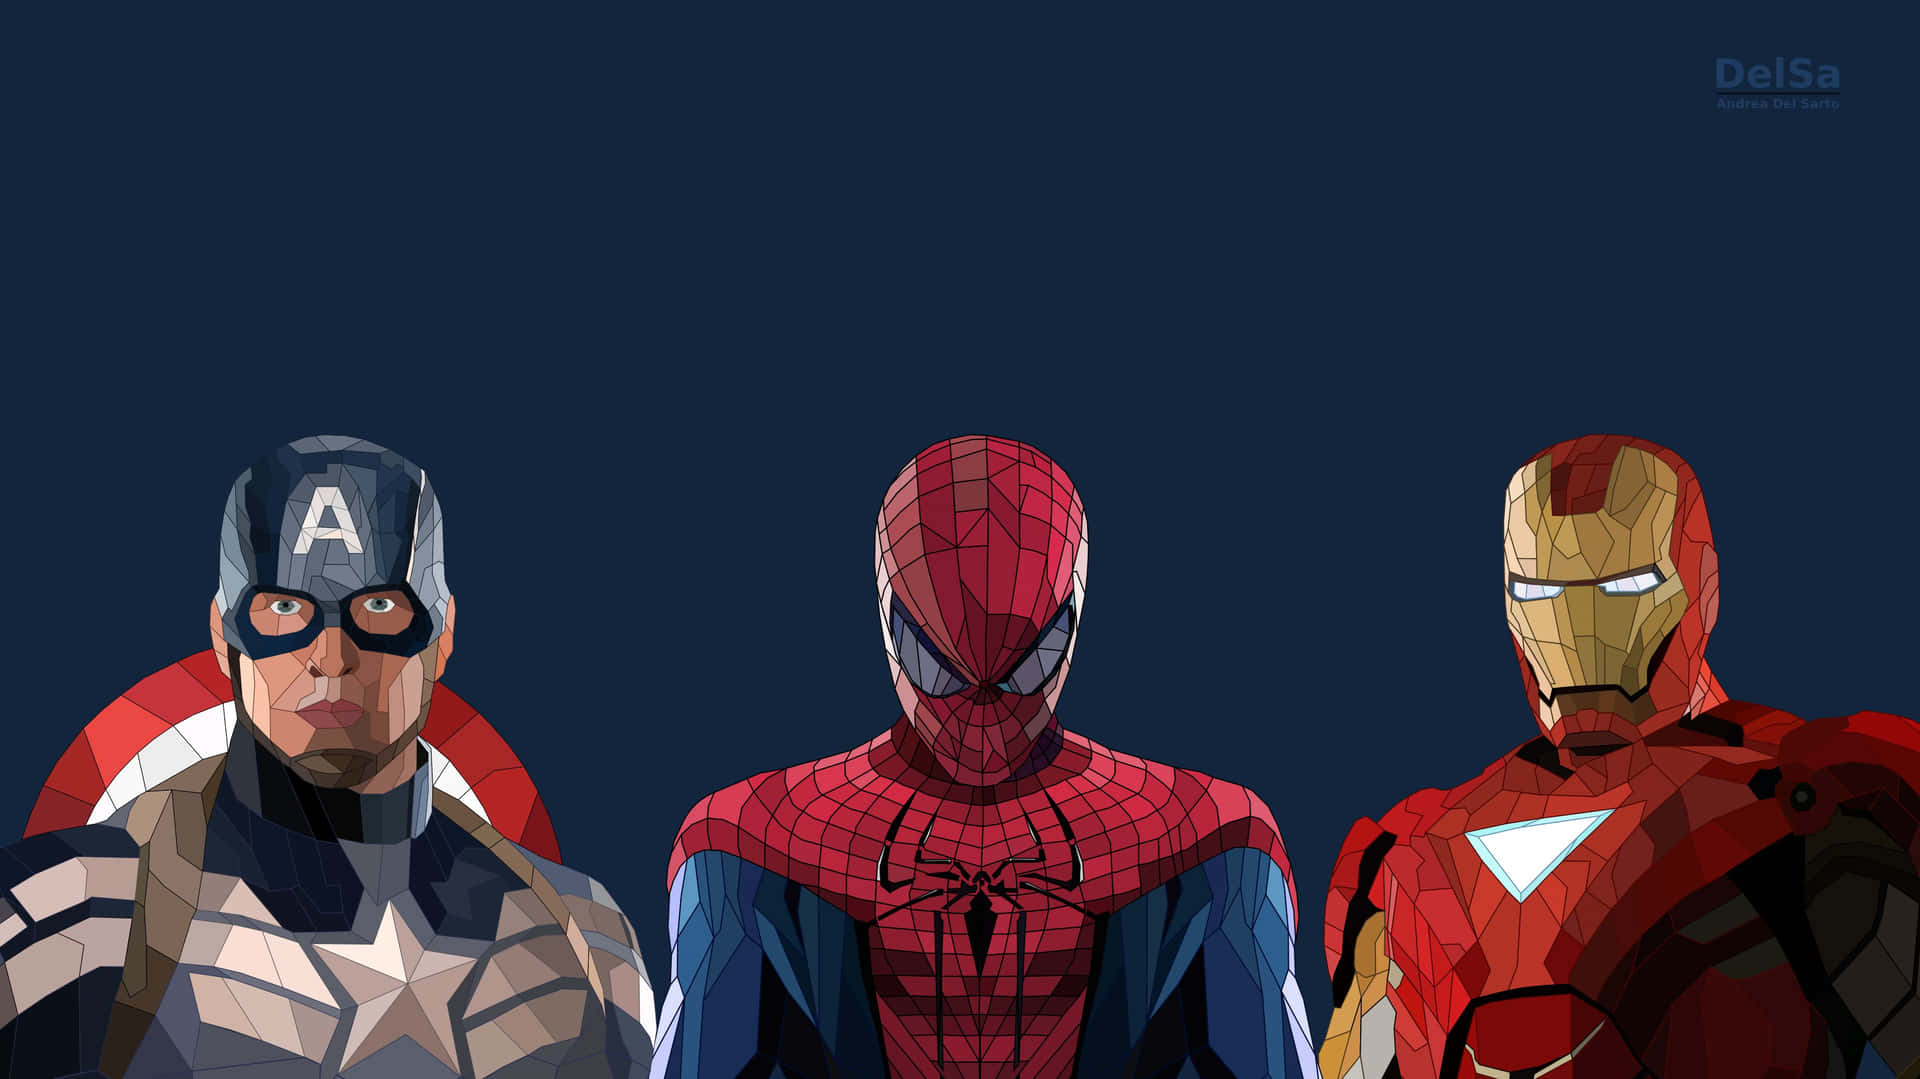 Spider-Man&Iron Man Join Forces Wallpaper